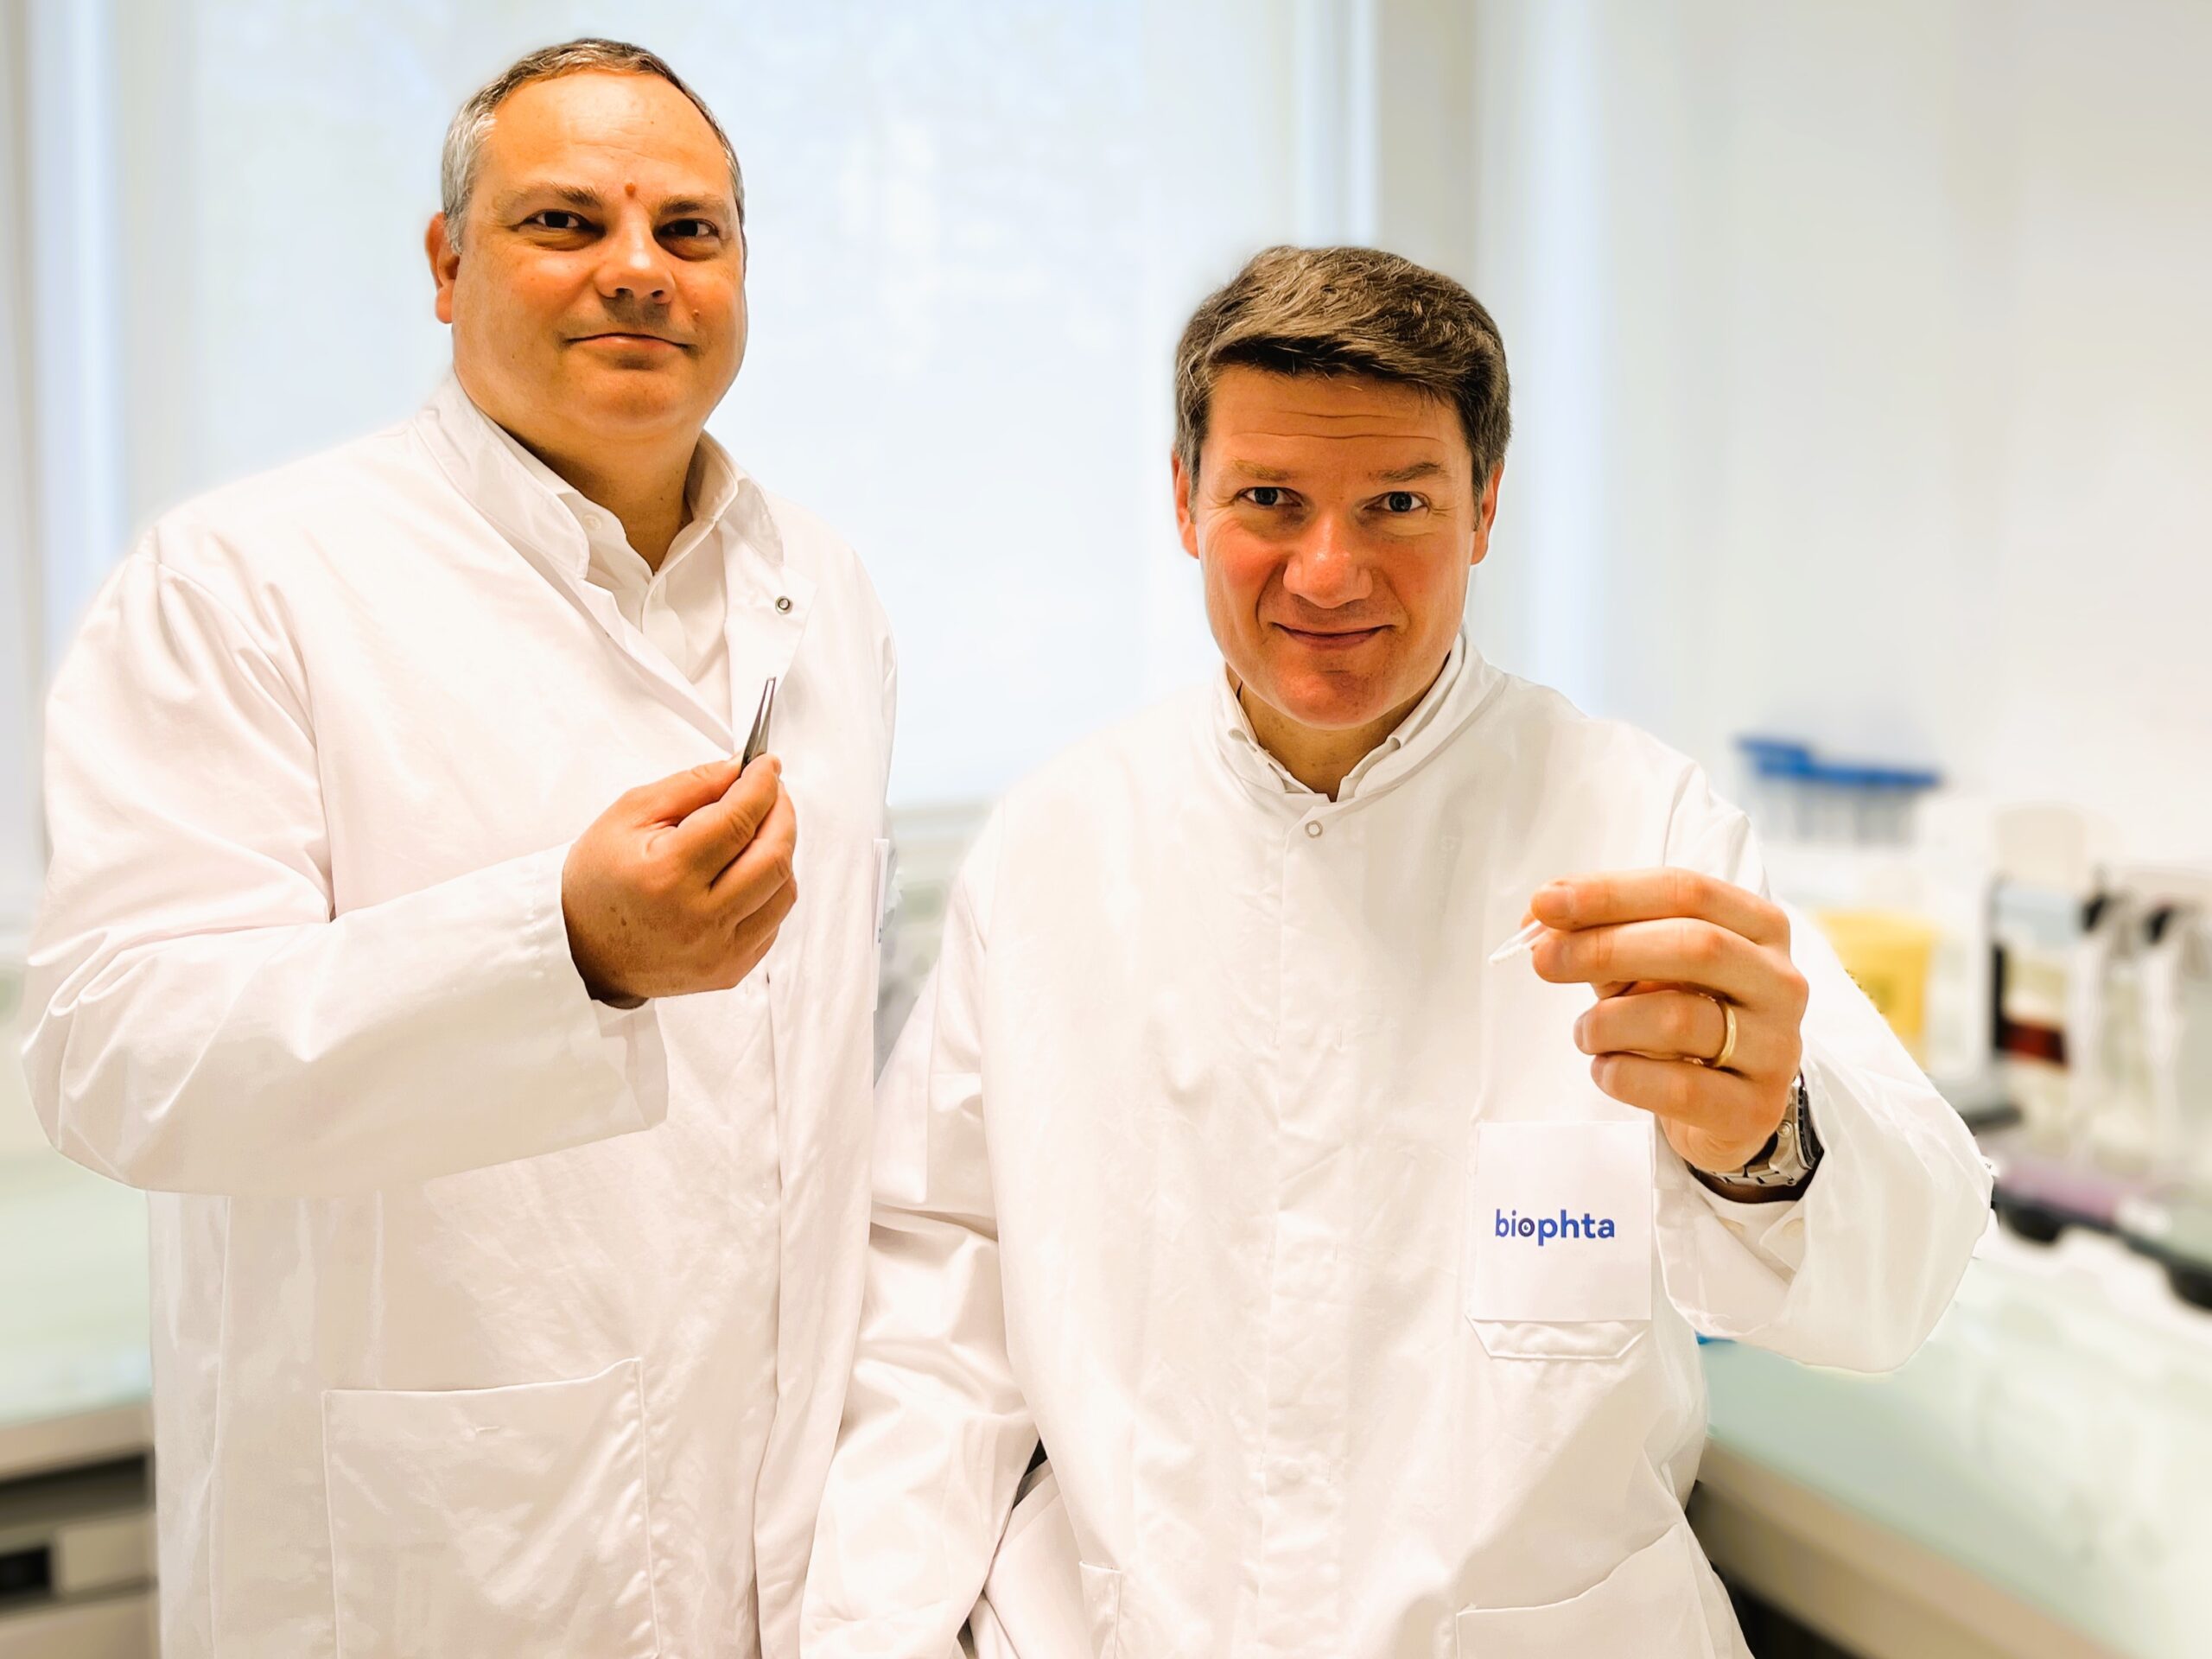 Biophta Co-Founders: CTO Jean Cuiné (left) and CEO Jean Garrec